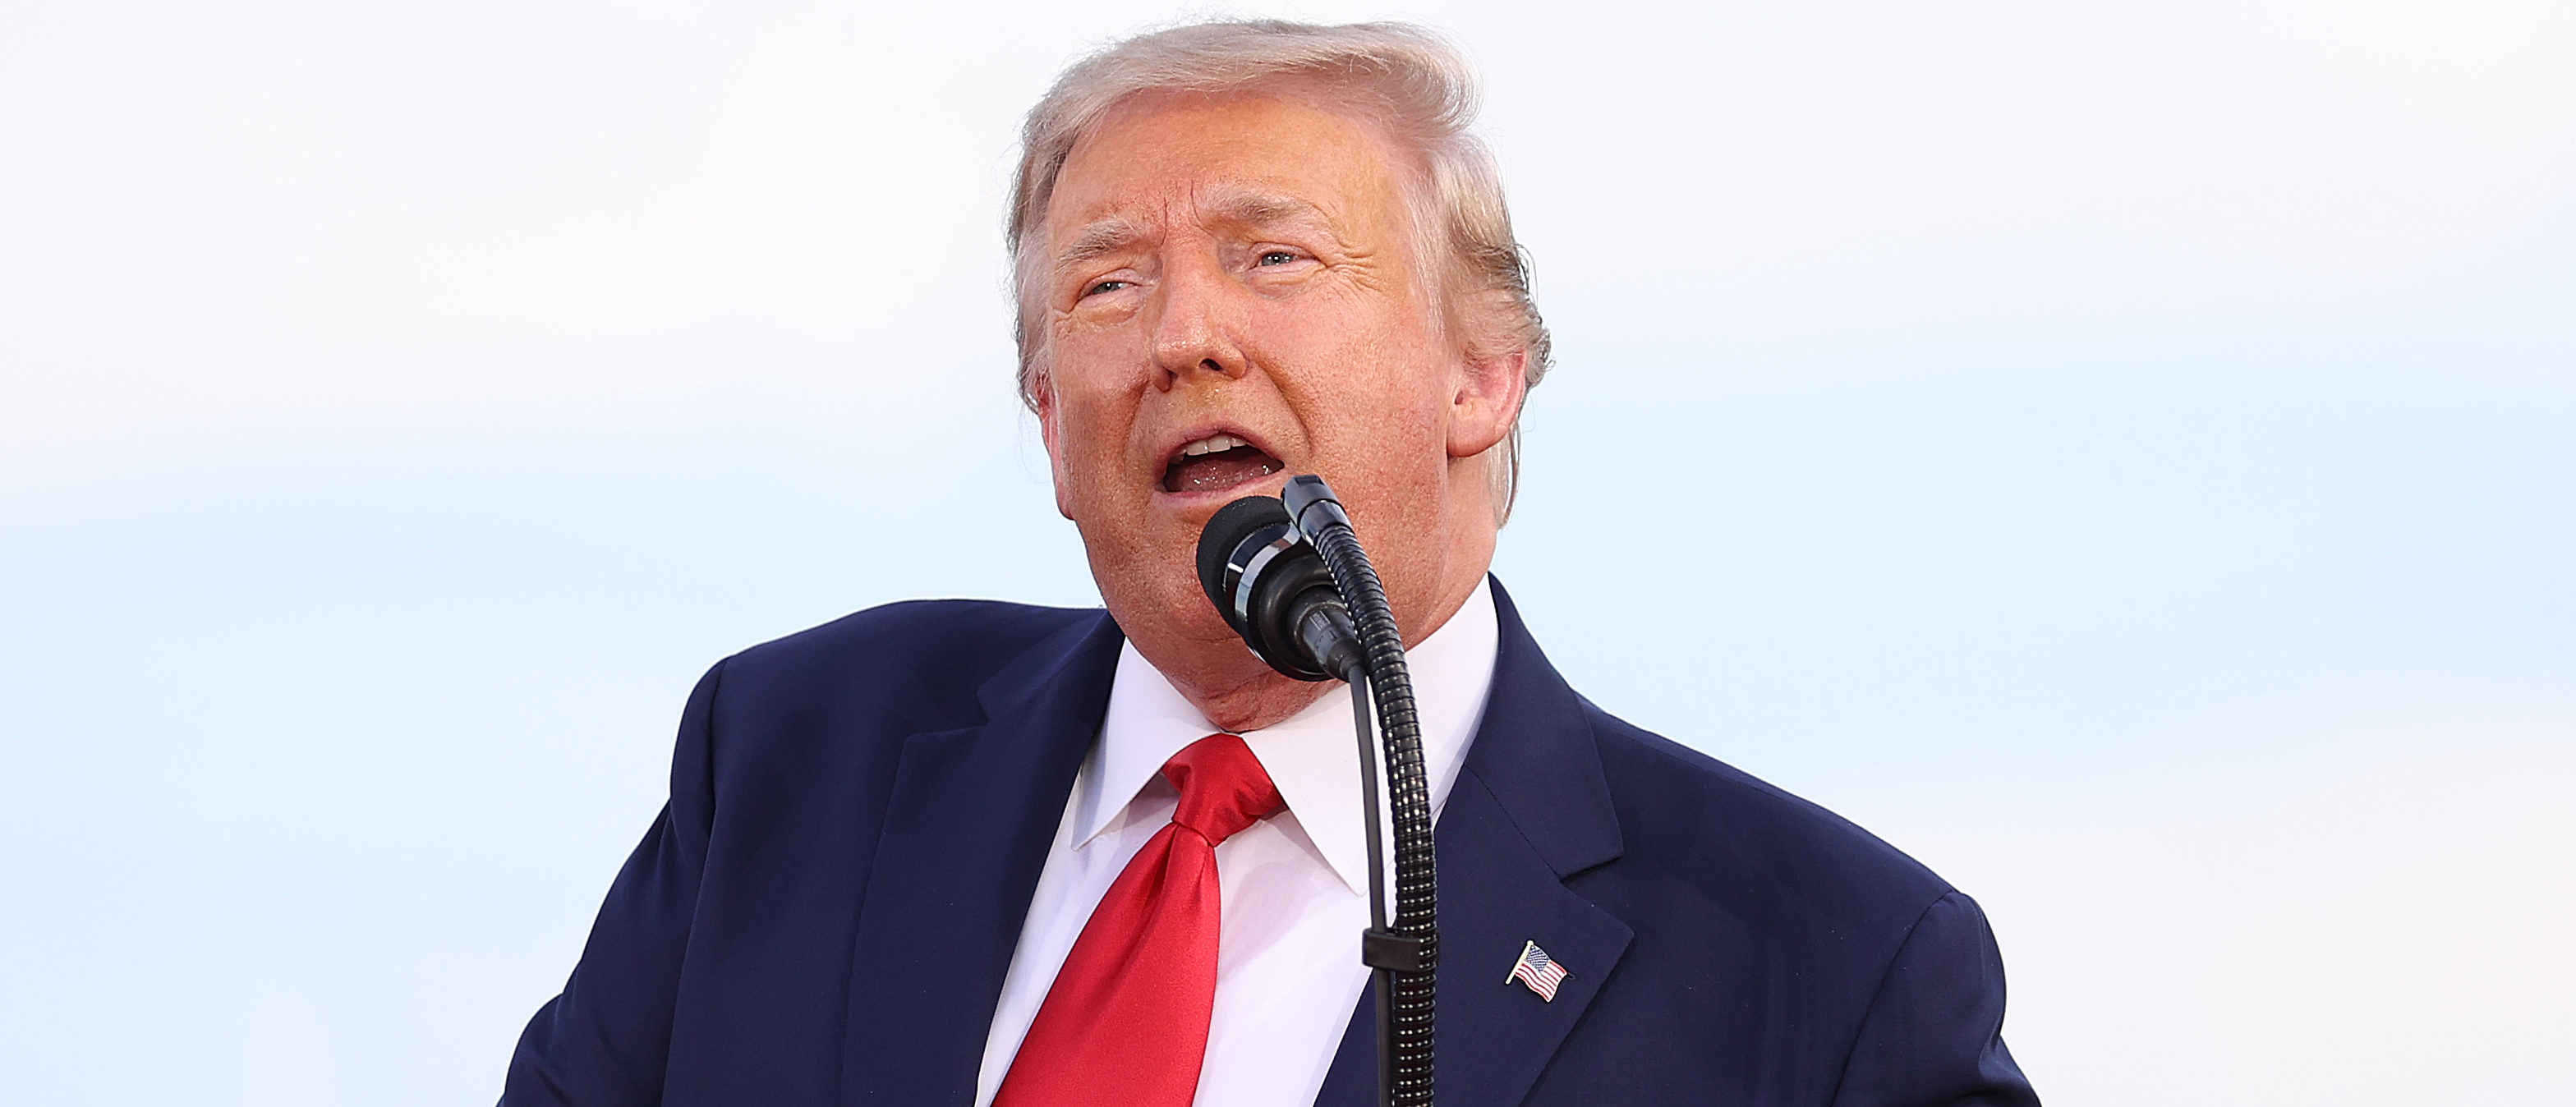 WASHINGTON, DC - JULY 04: President Donald Trump speaks during an event on the South Lawn of the White House on July 04, 2020 in Washington, DC. President Trump is hosting a "Salute to America" celebration that includes flyovers by military aircraft and a large fireworks display. (Photo by Tasos Katopodis/Getty Images)